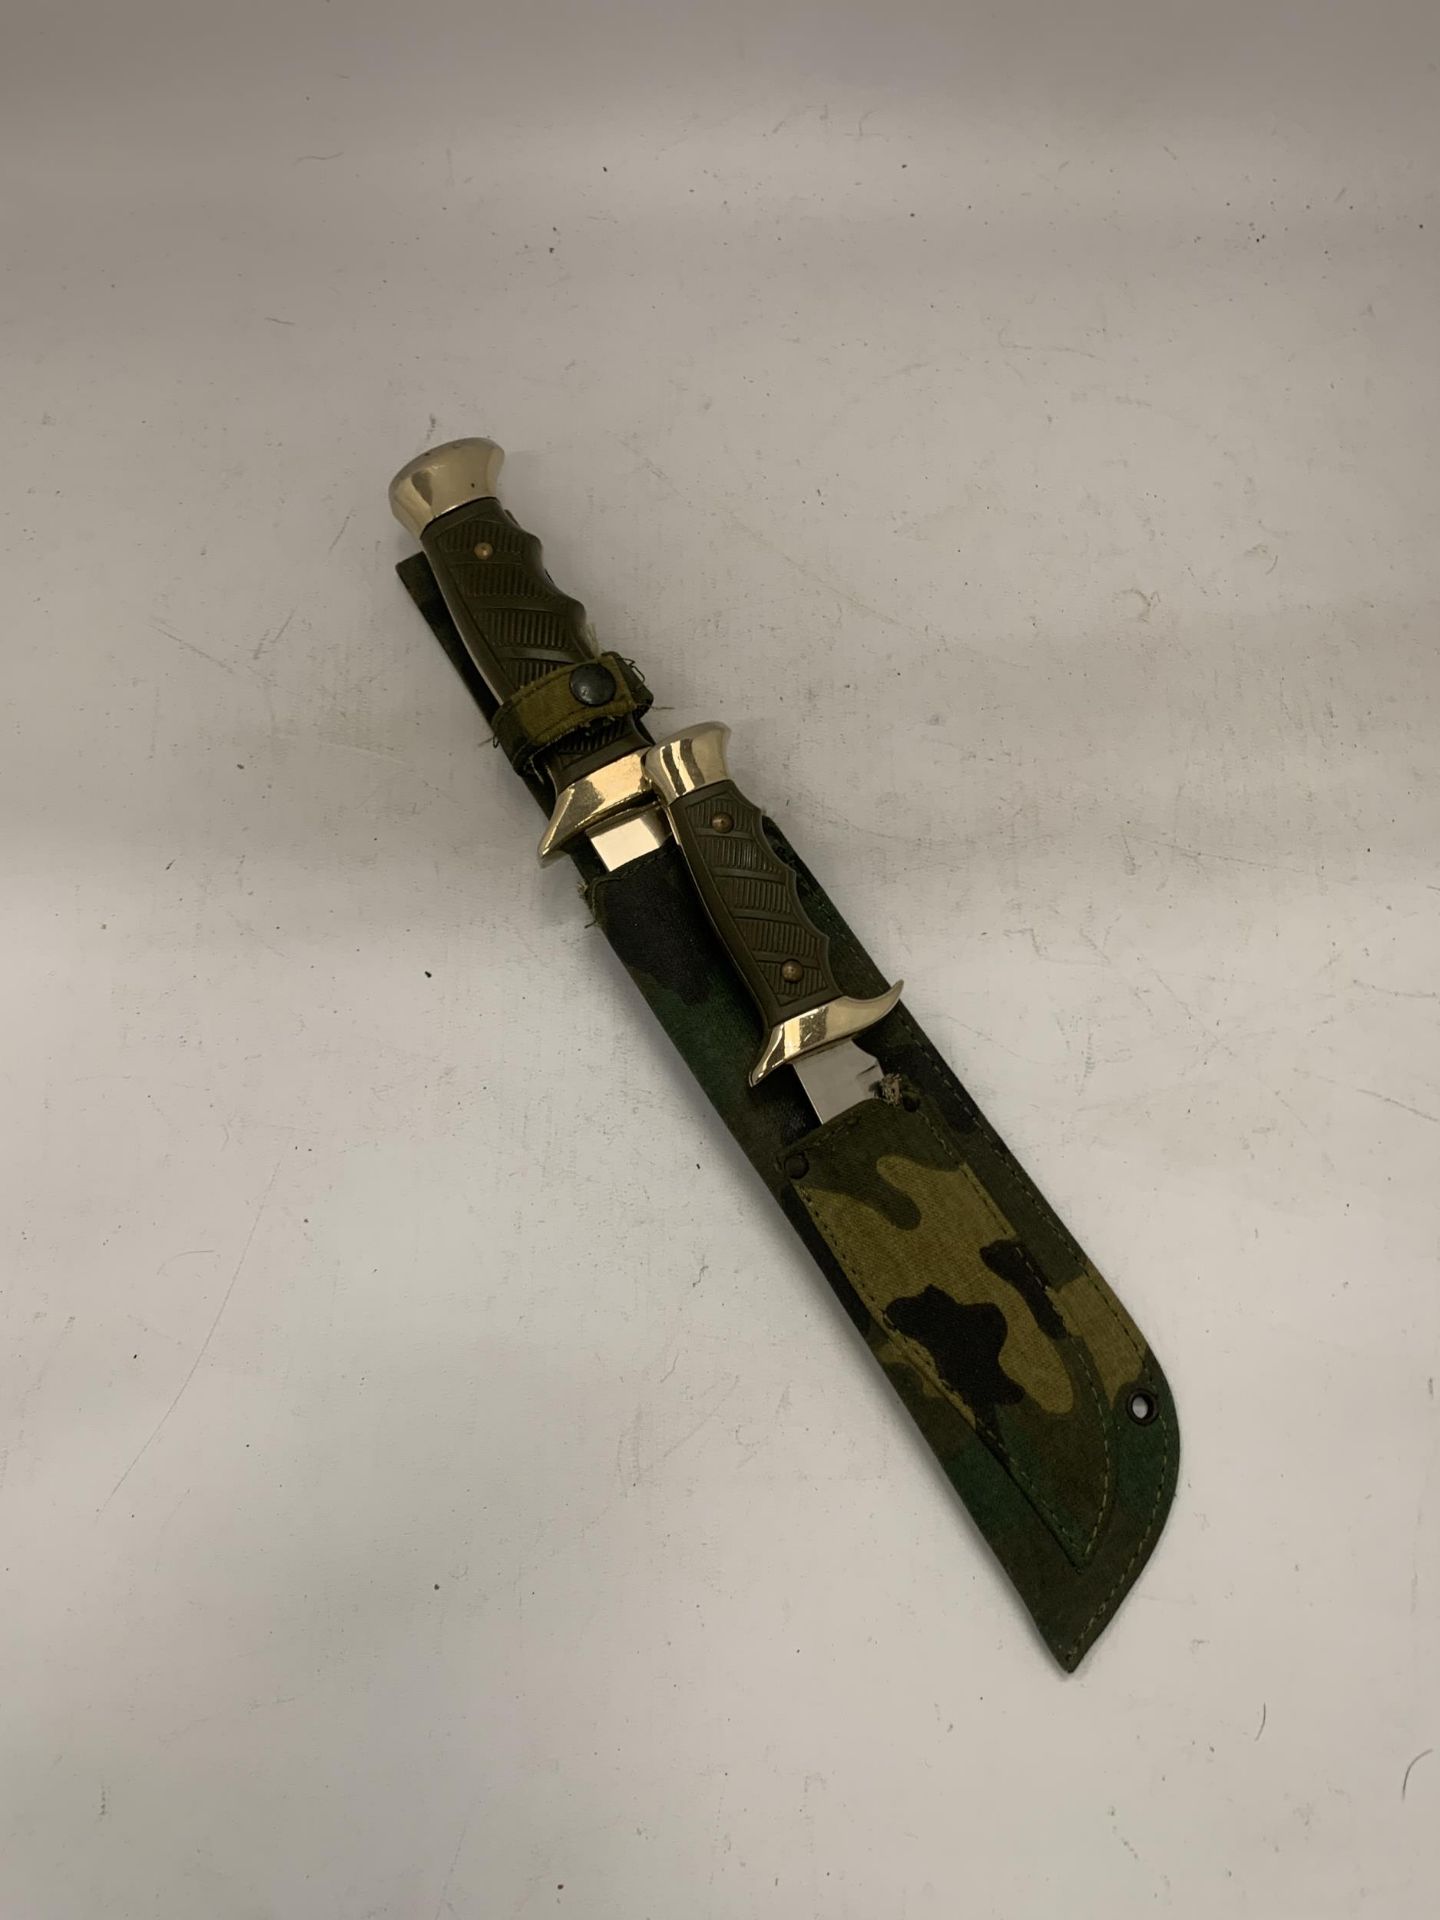 TWO HUNTING KNIVES IN A CAMOFLAGUE SHEATH